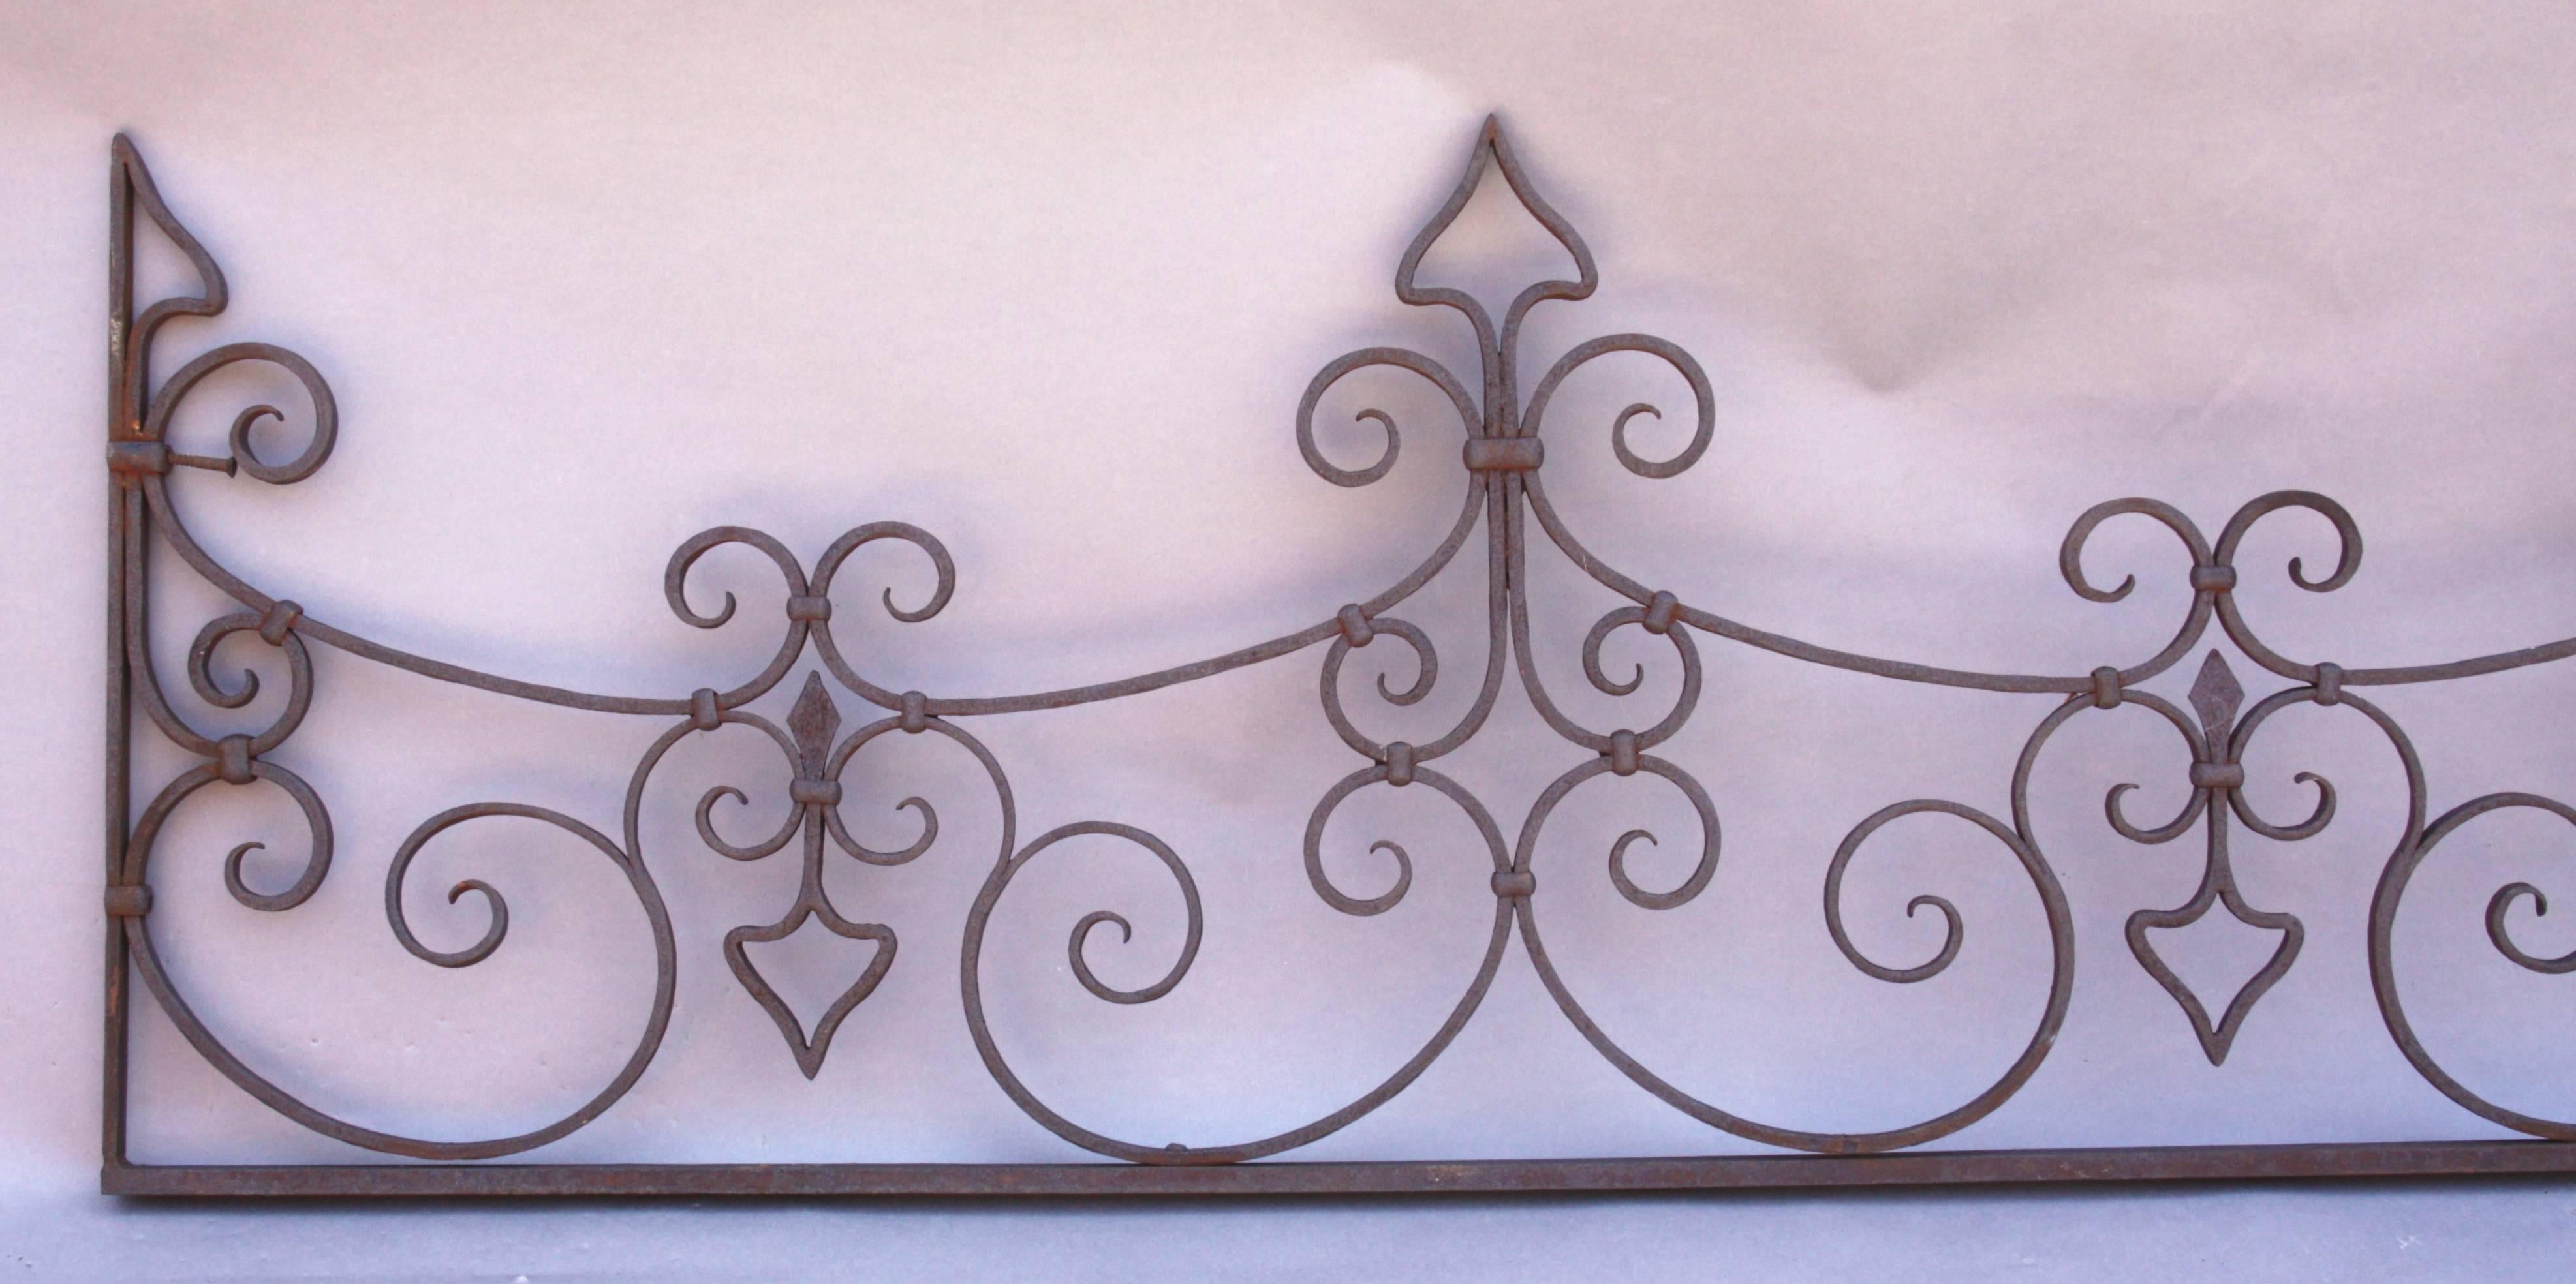 Nicely crafted 1920s wrought iron work with strapped construction.